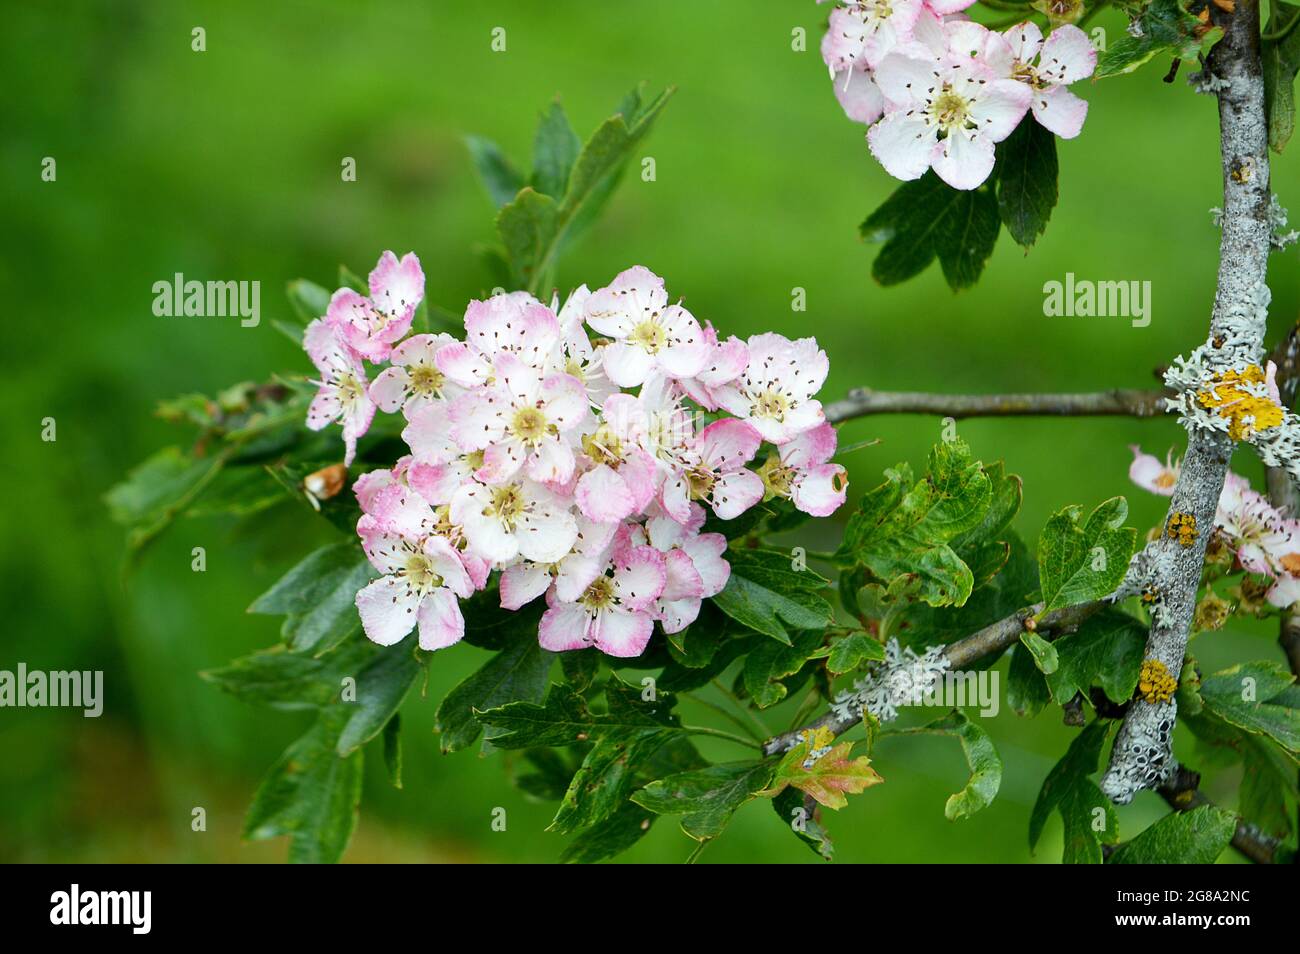 The pink and white blossom of hawthorn (Crataegus monogyna) are a familiar site in the hedgerows of Perthshire in May and June. Stock Photo